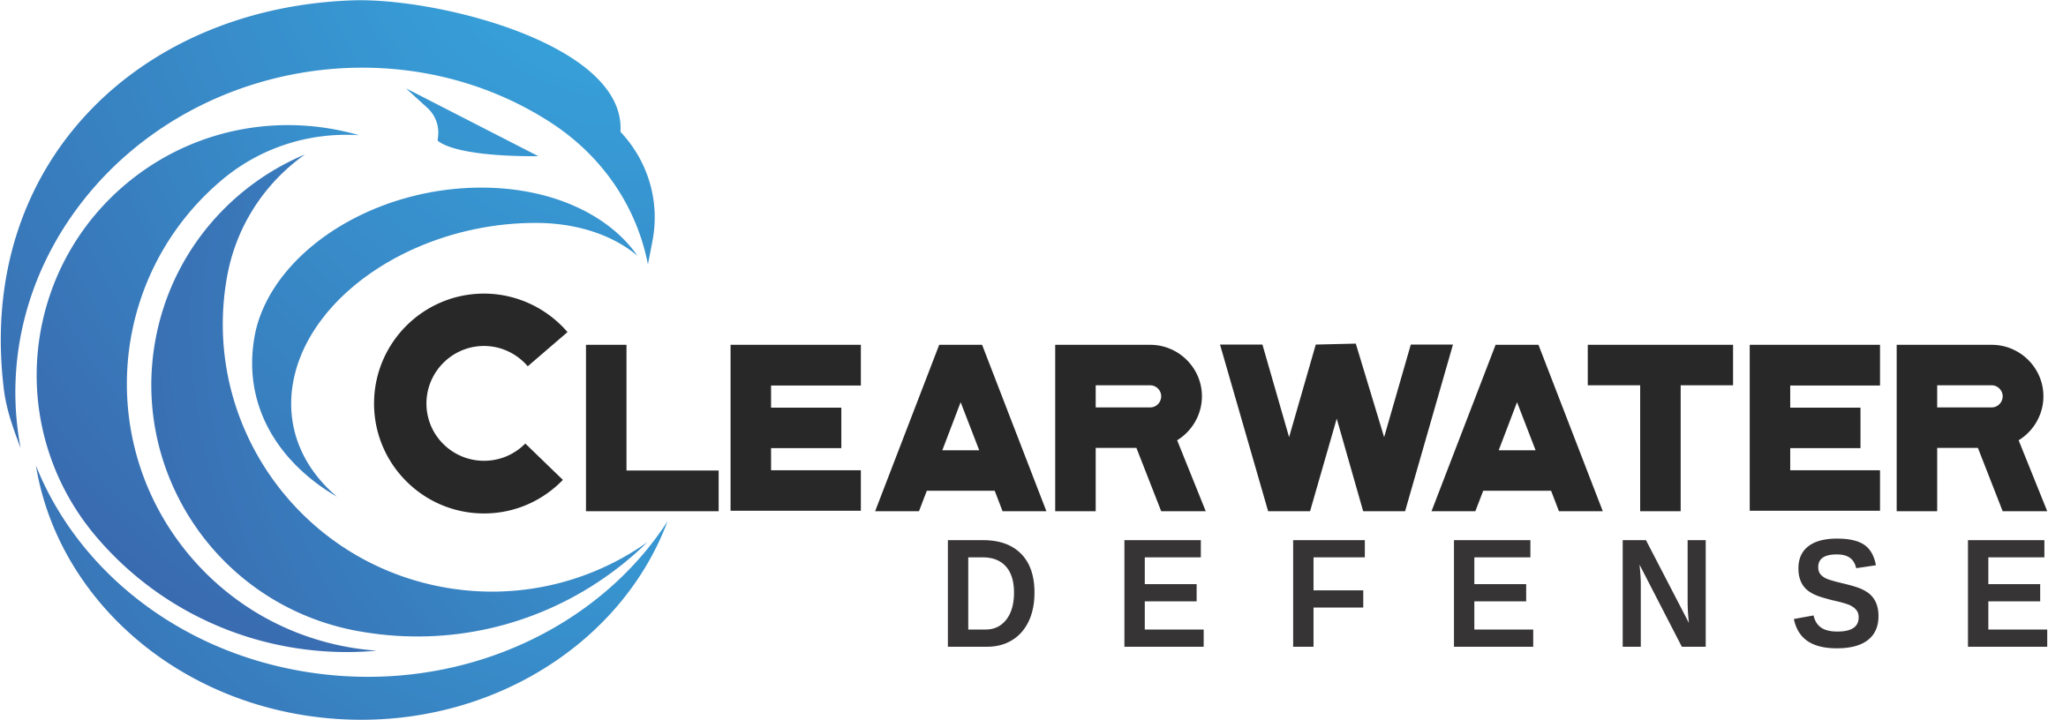 Clearwater Defense Logo